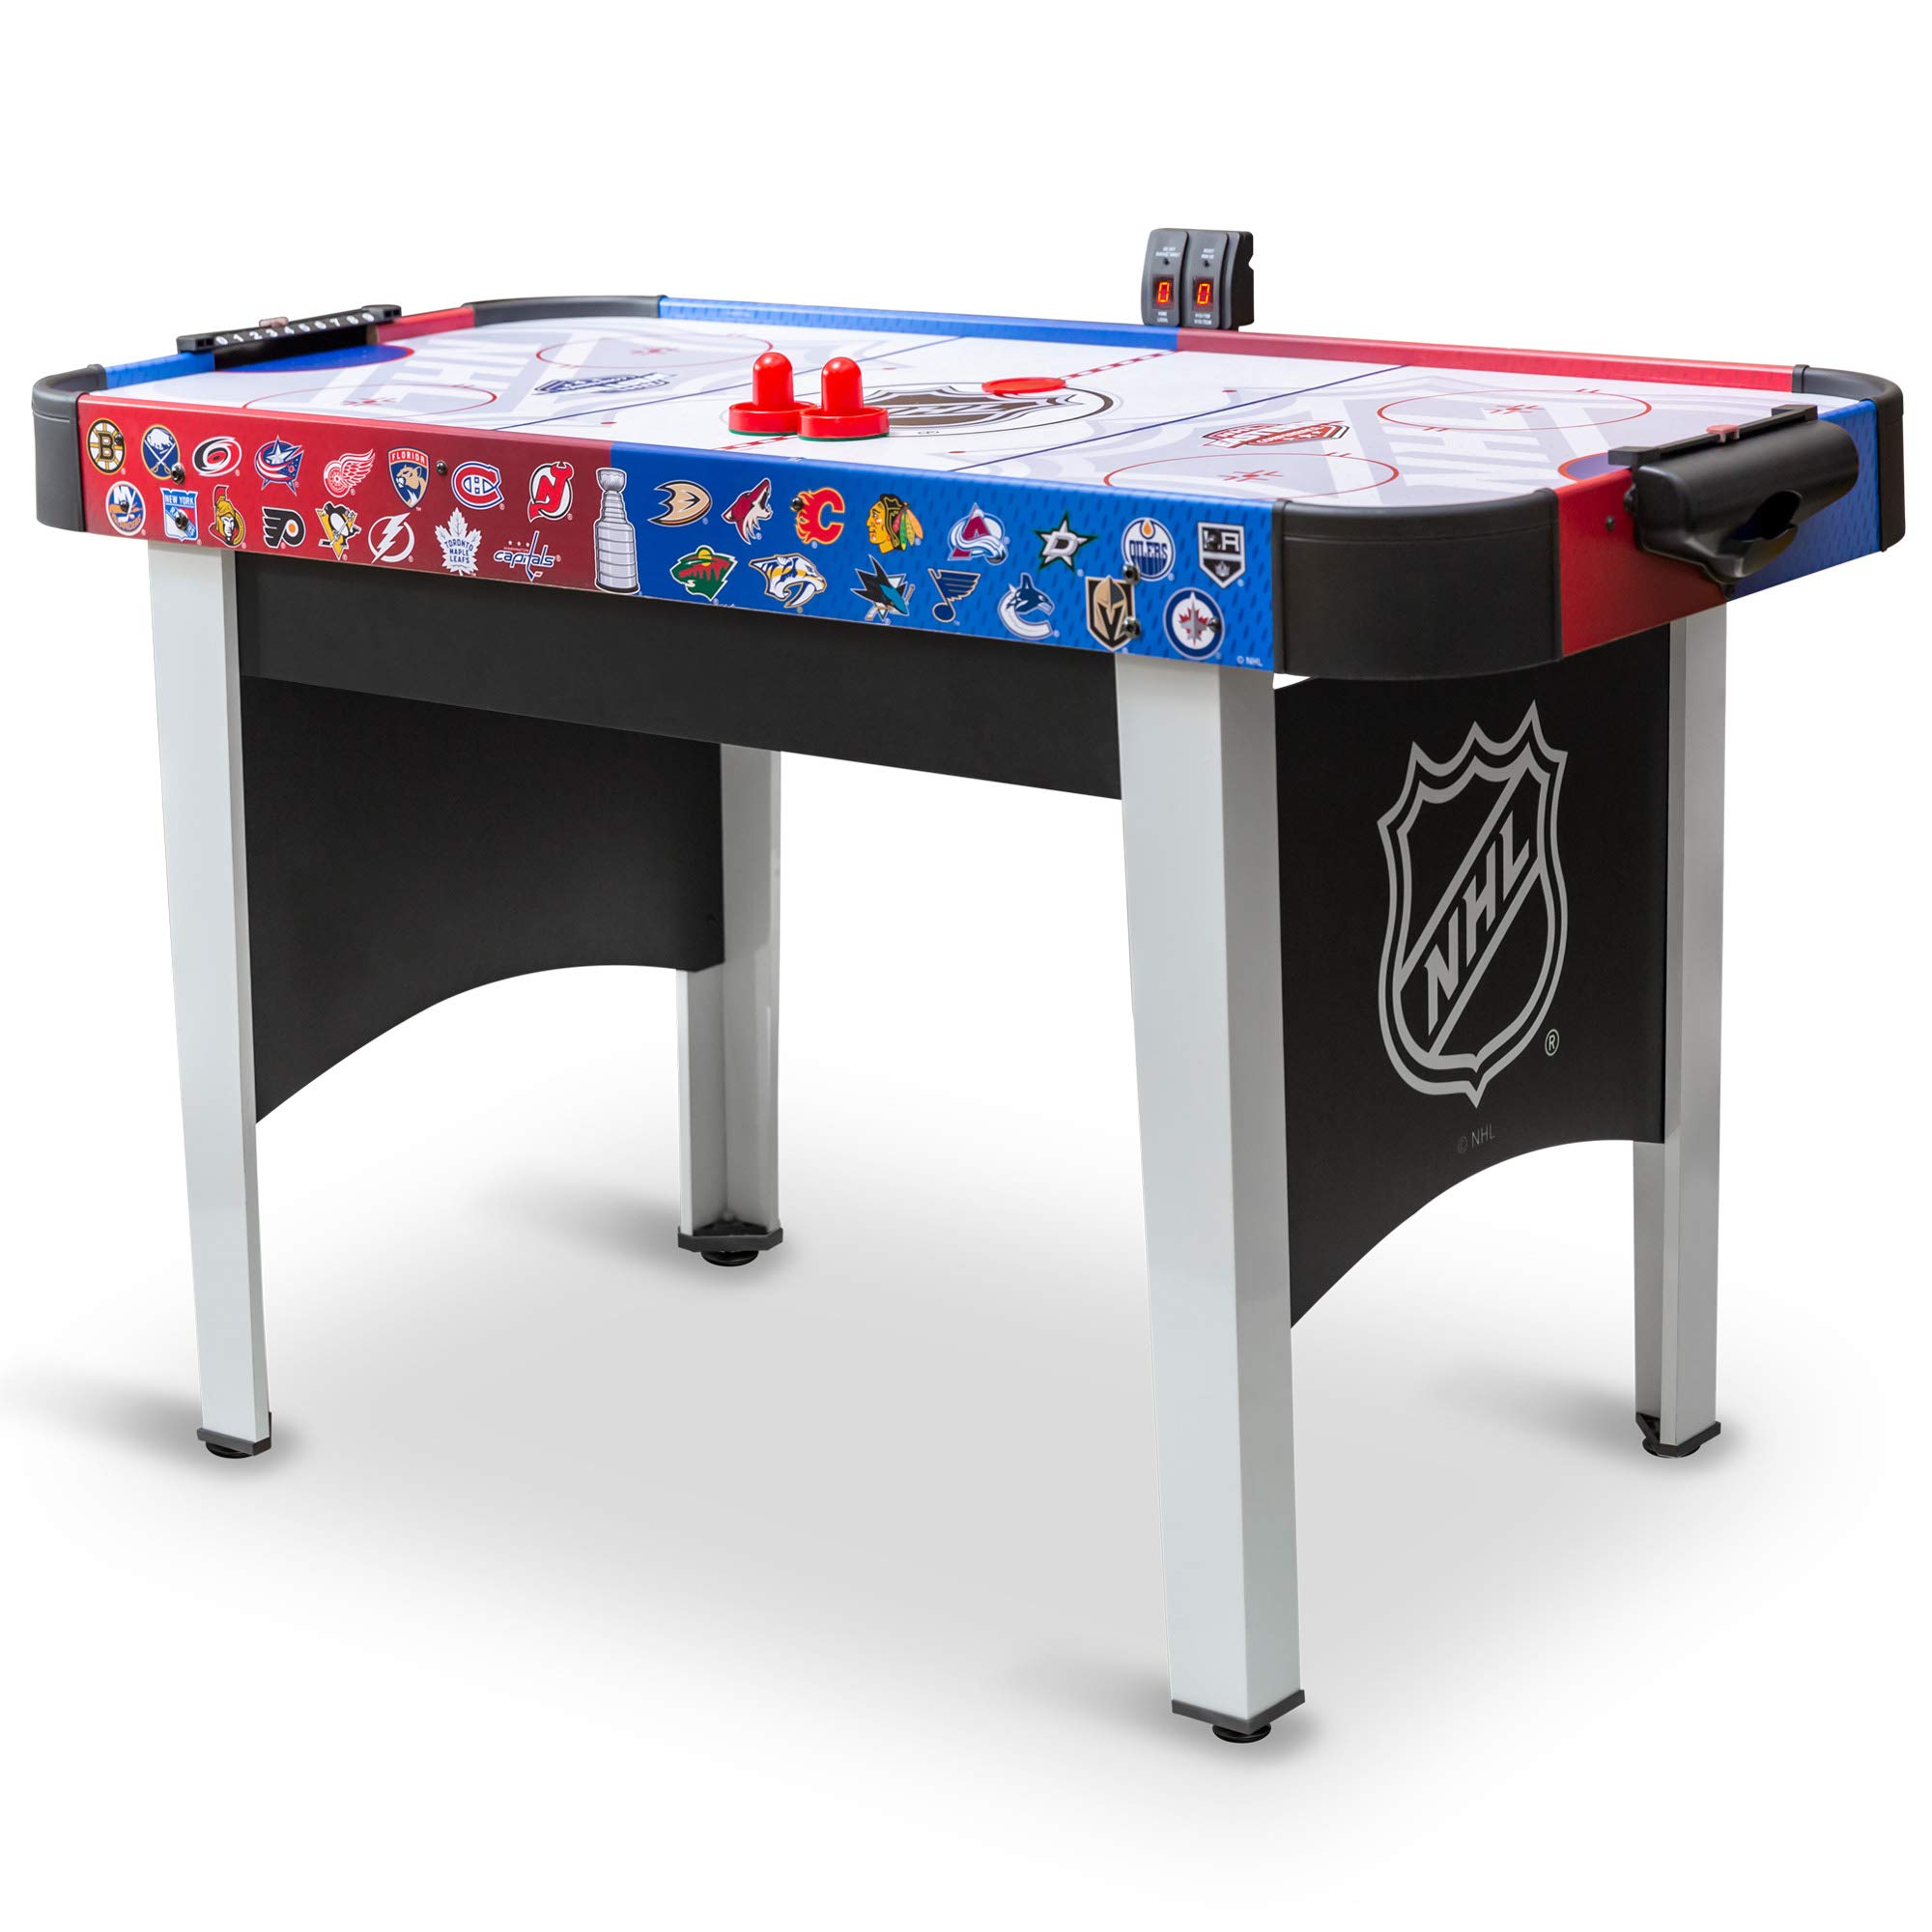 Eastpoint Sports 48 Mid-Size NHL Rush Indoor Hover Hockey game Table Easy Setup, Air-Powered Play with LED Scoring, Black